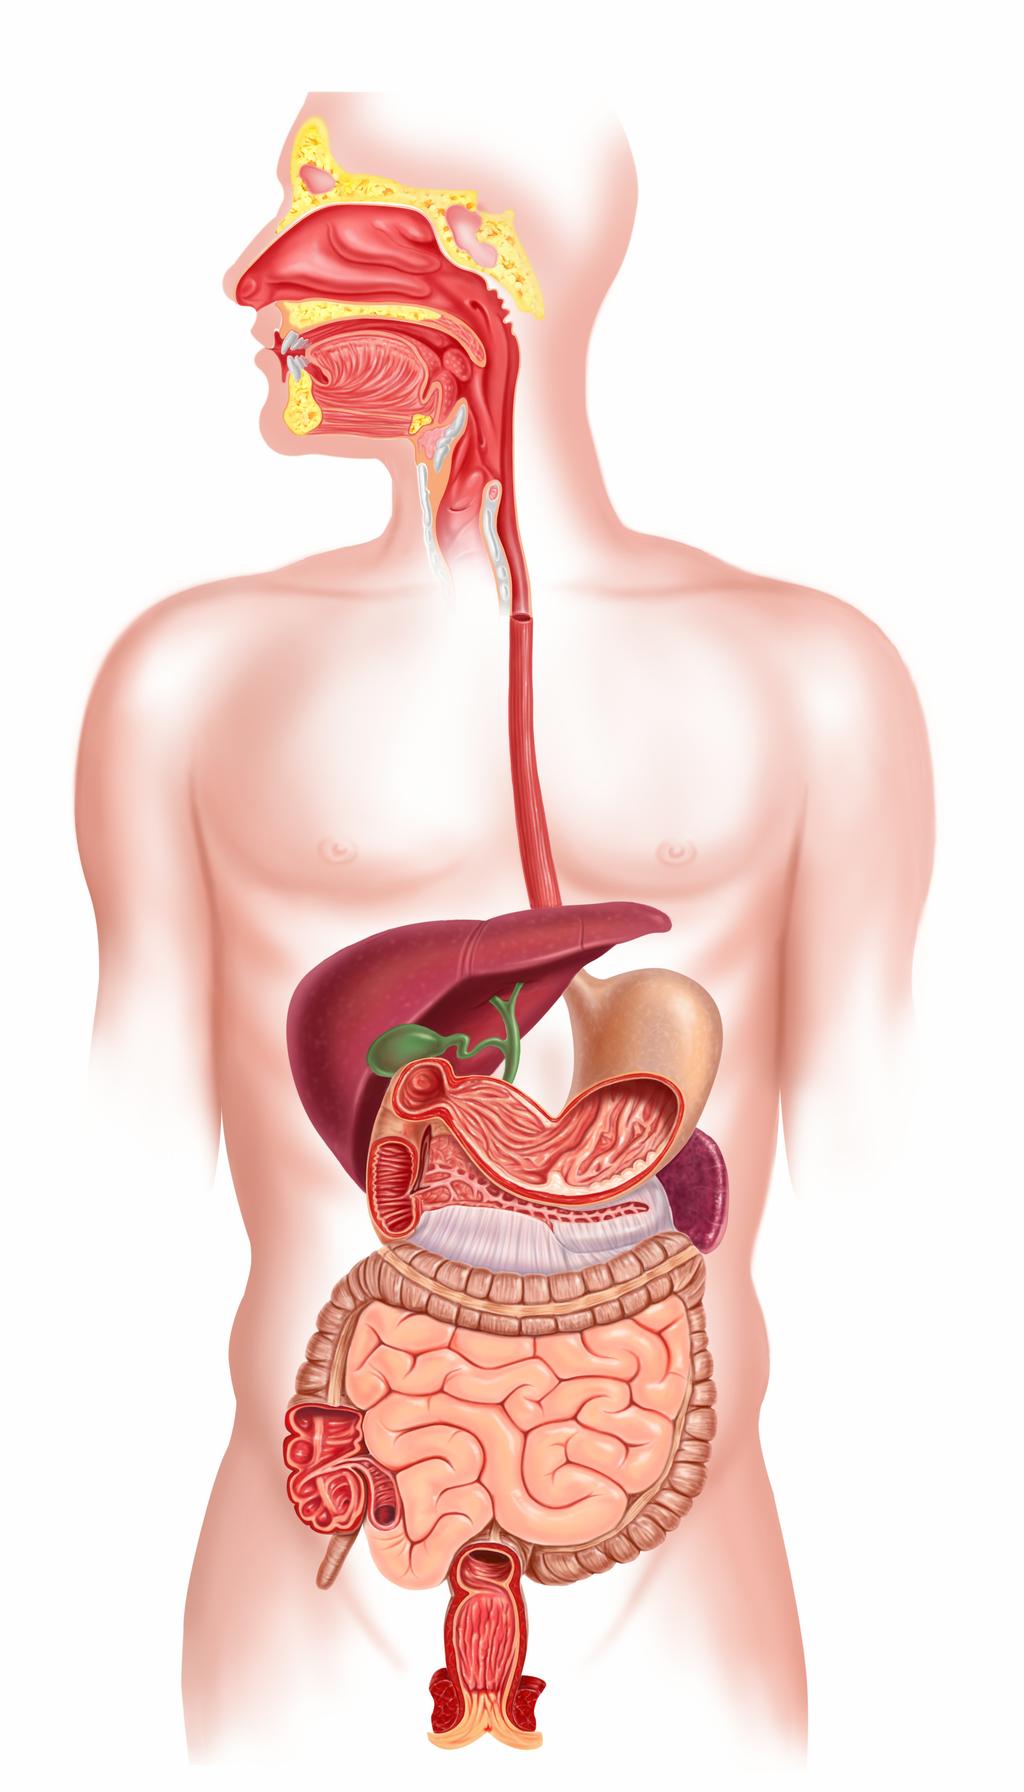 Physiological Factors Location Digestive tract region & microenvironment / niche Mucus layer vs.